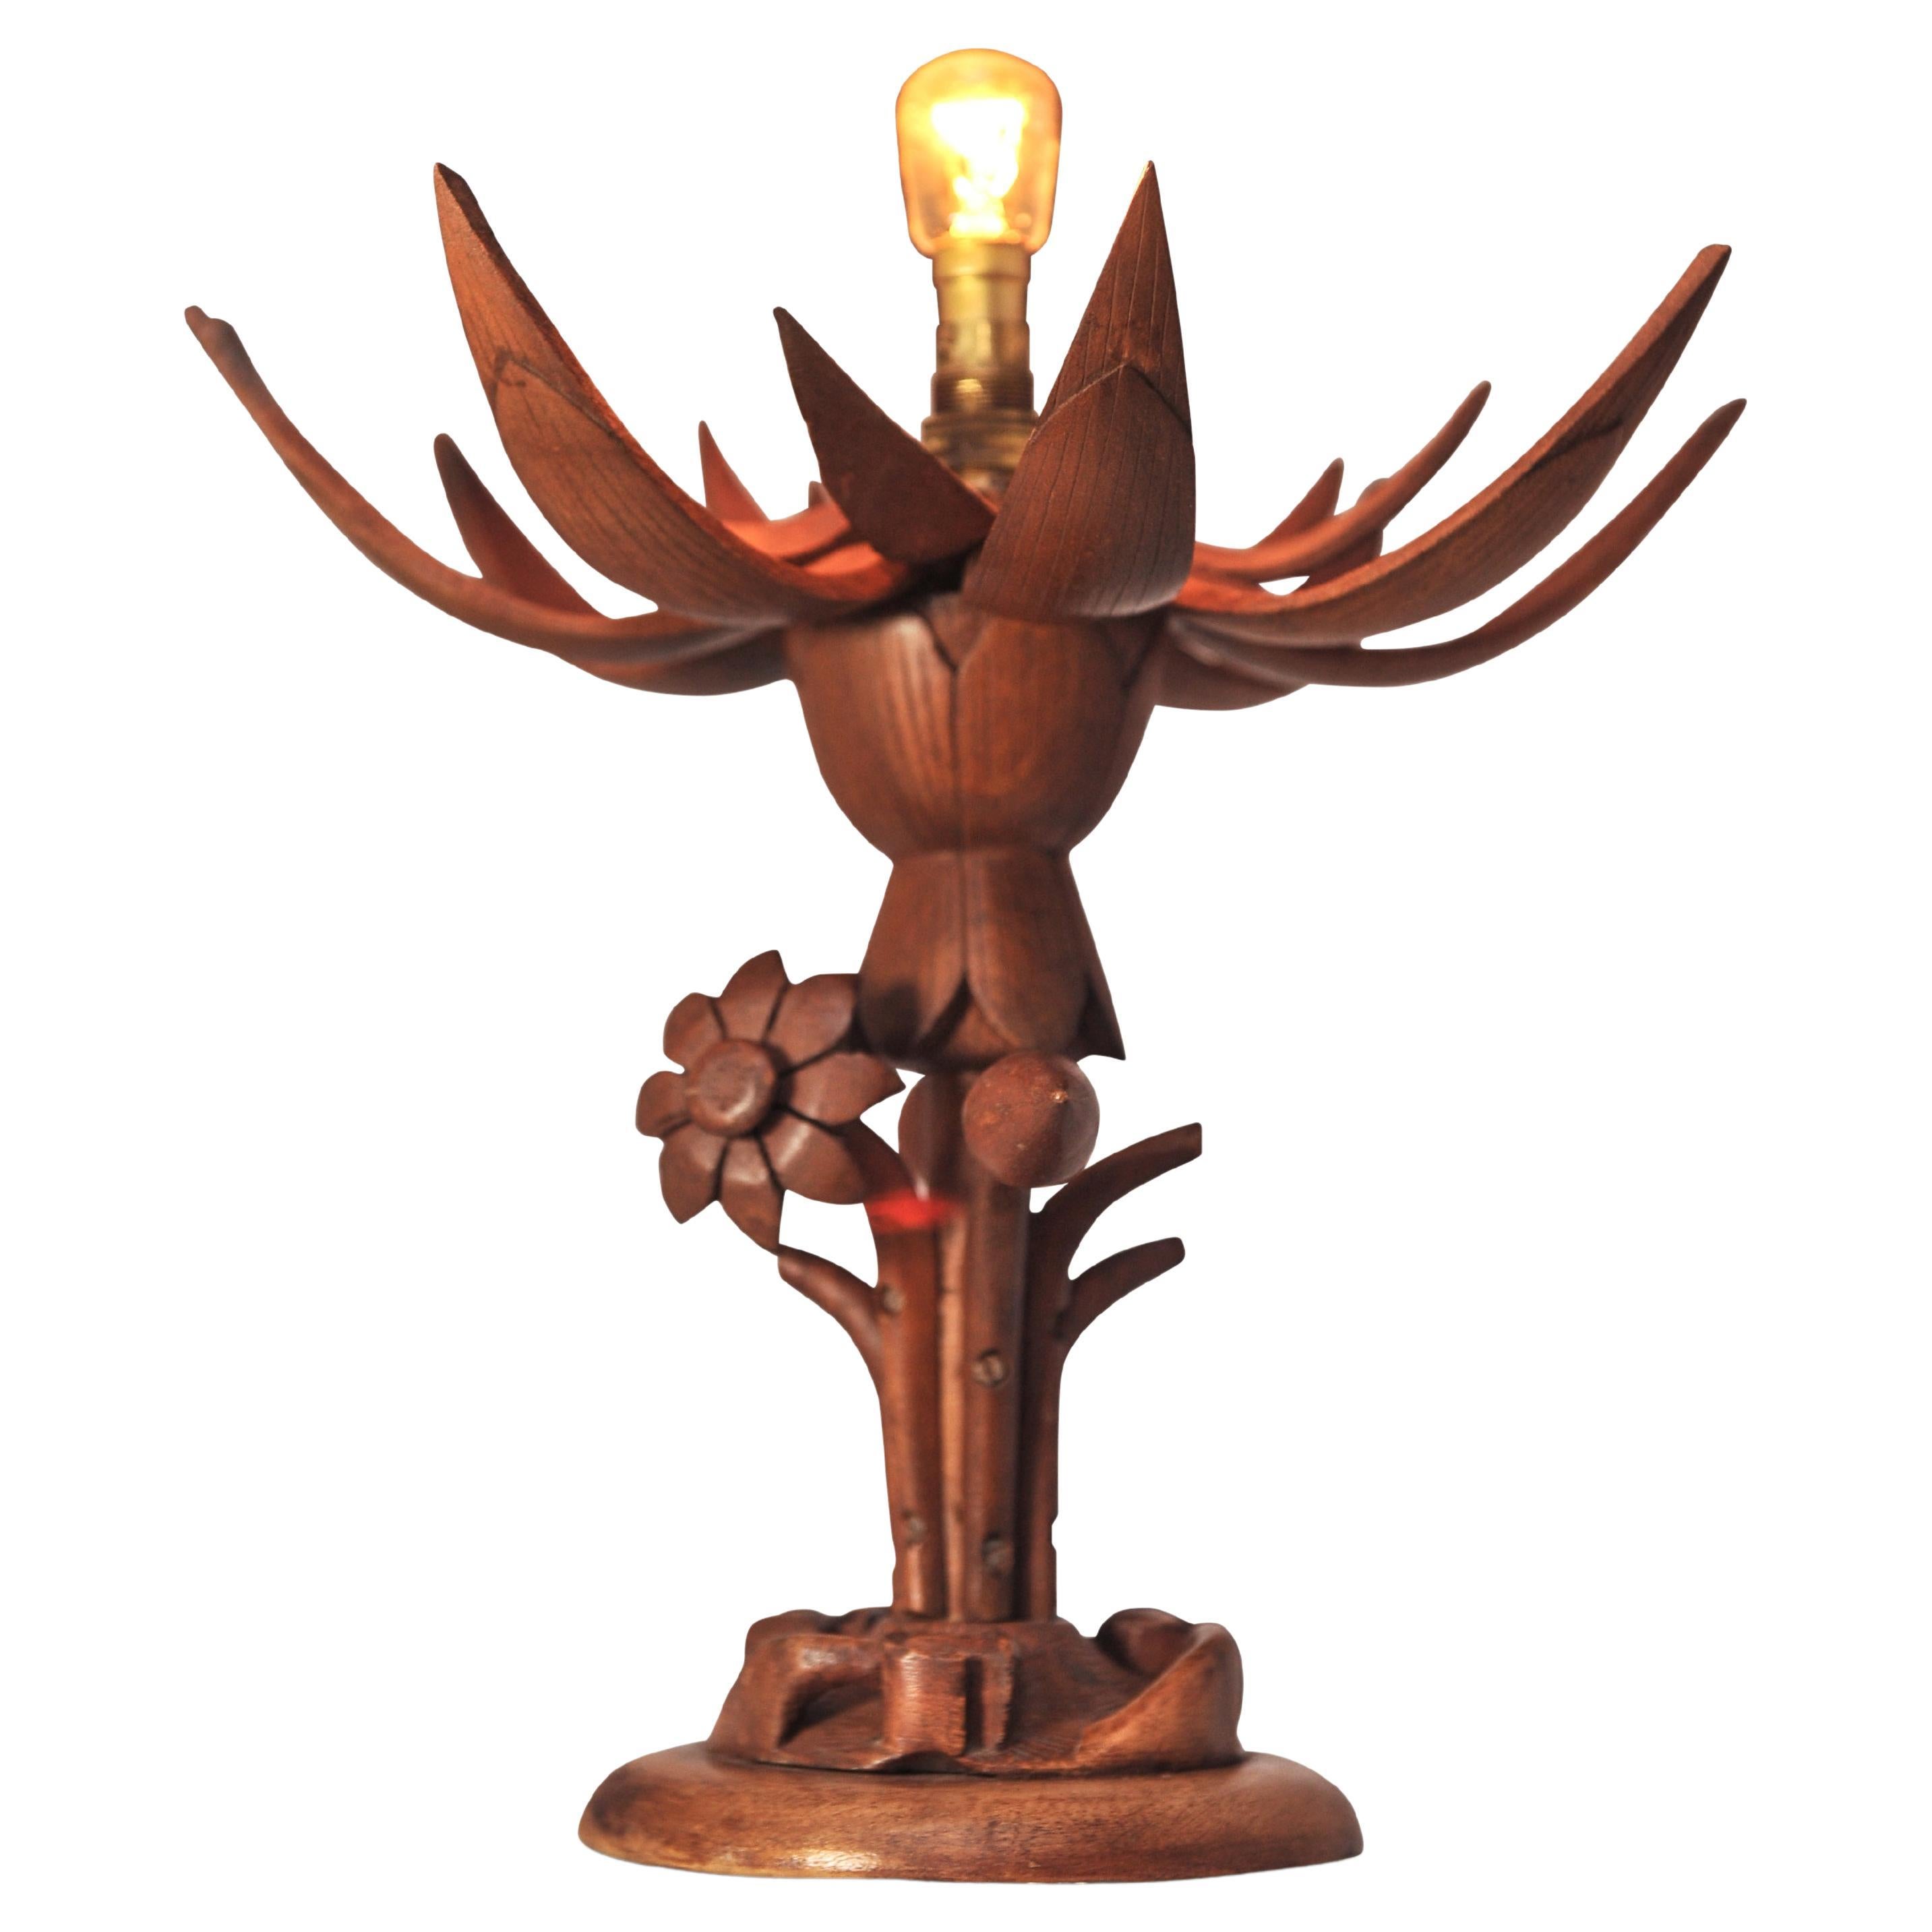 A Hand Made, Organic Hand Carved Wood Lotus Flower Table Lamp, With Petals That Retract To Reveal The Light.

A unique piece, that's both at once whimsical and also arts and crafts.

